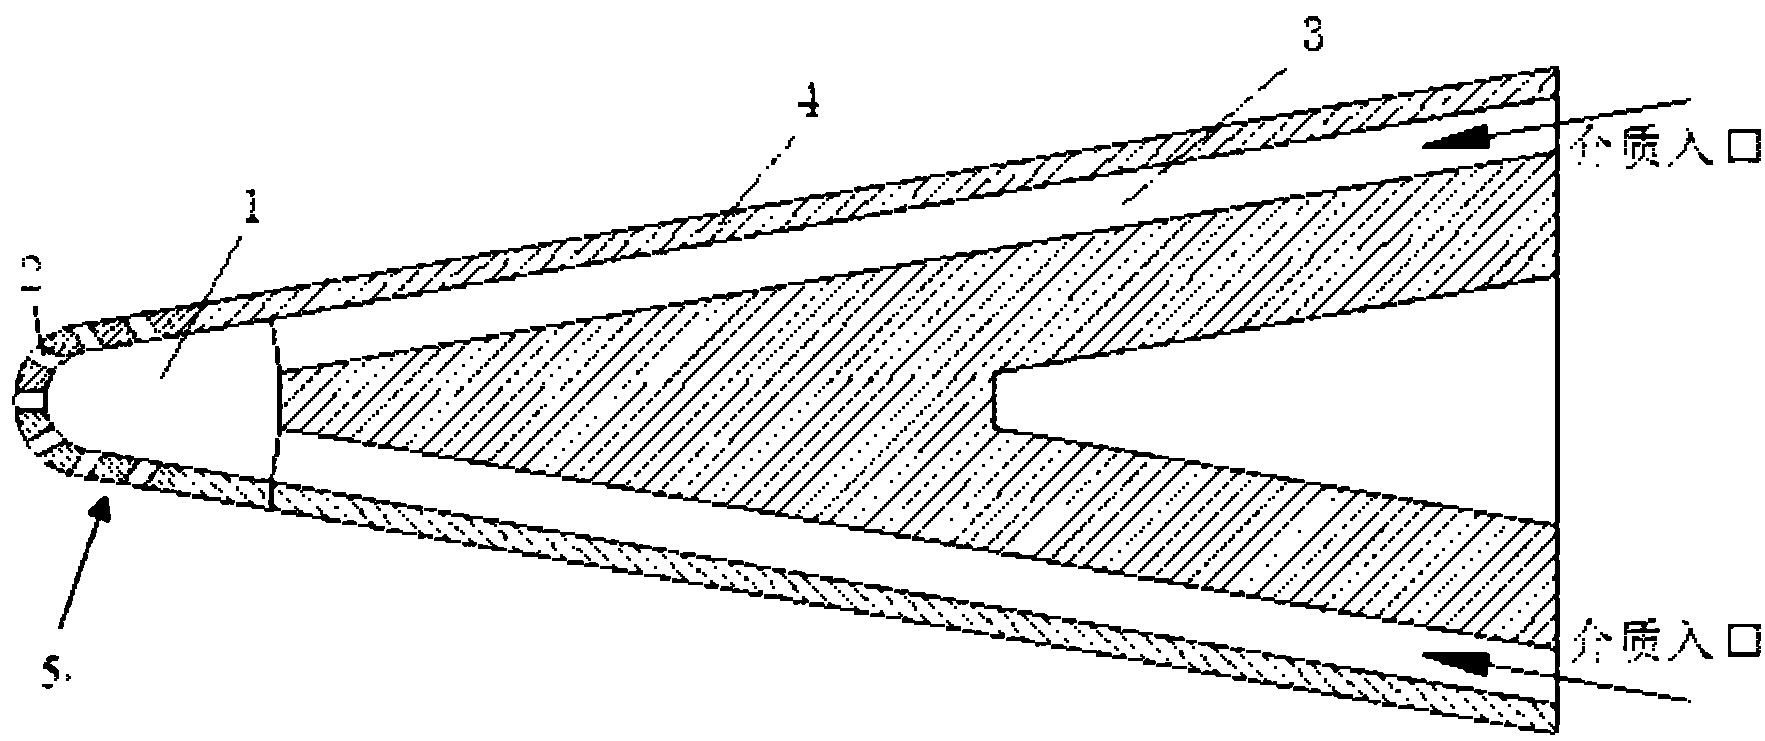 Air film and micro straight channel cooling structure for front edge of hypersonic vehicle